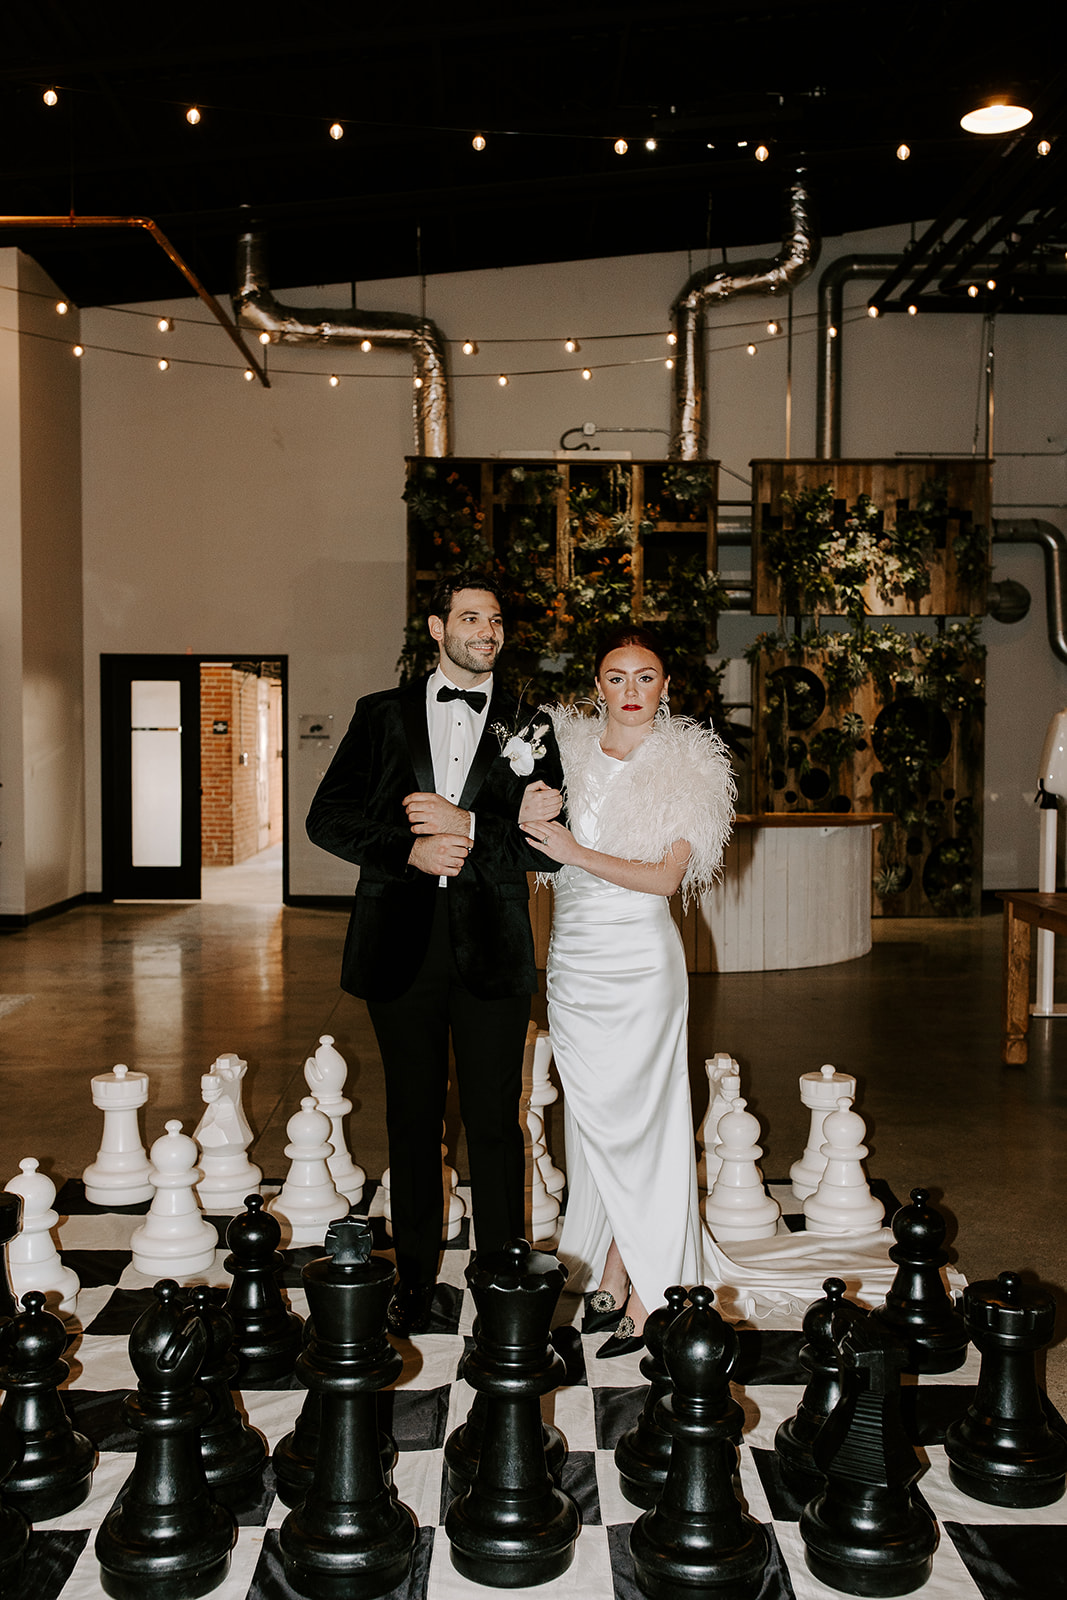 bride and groom pose with the giant chess set